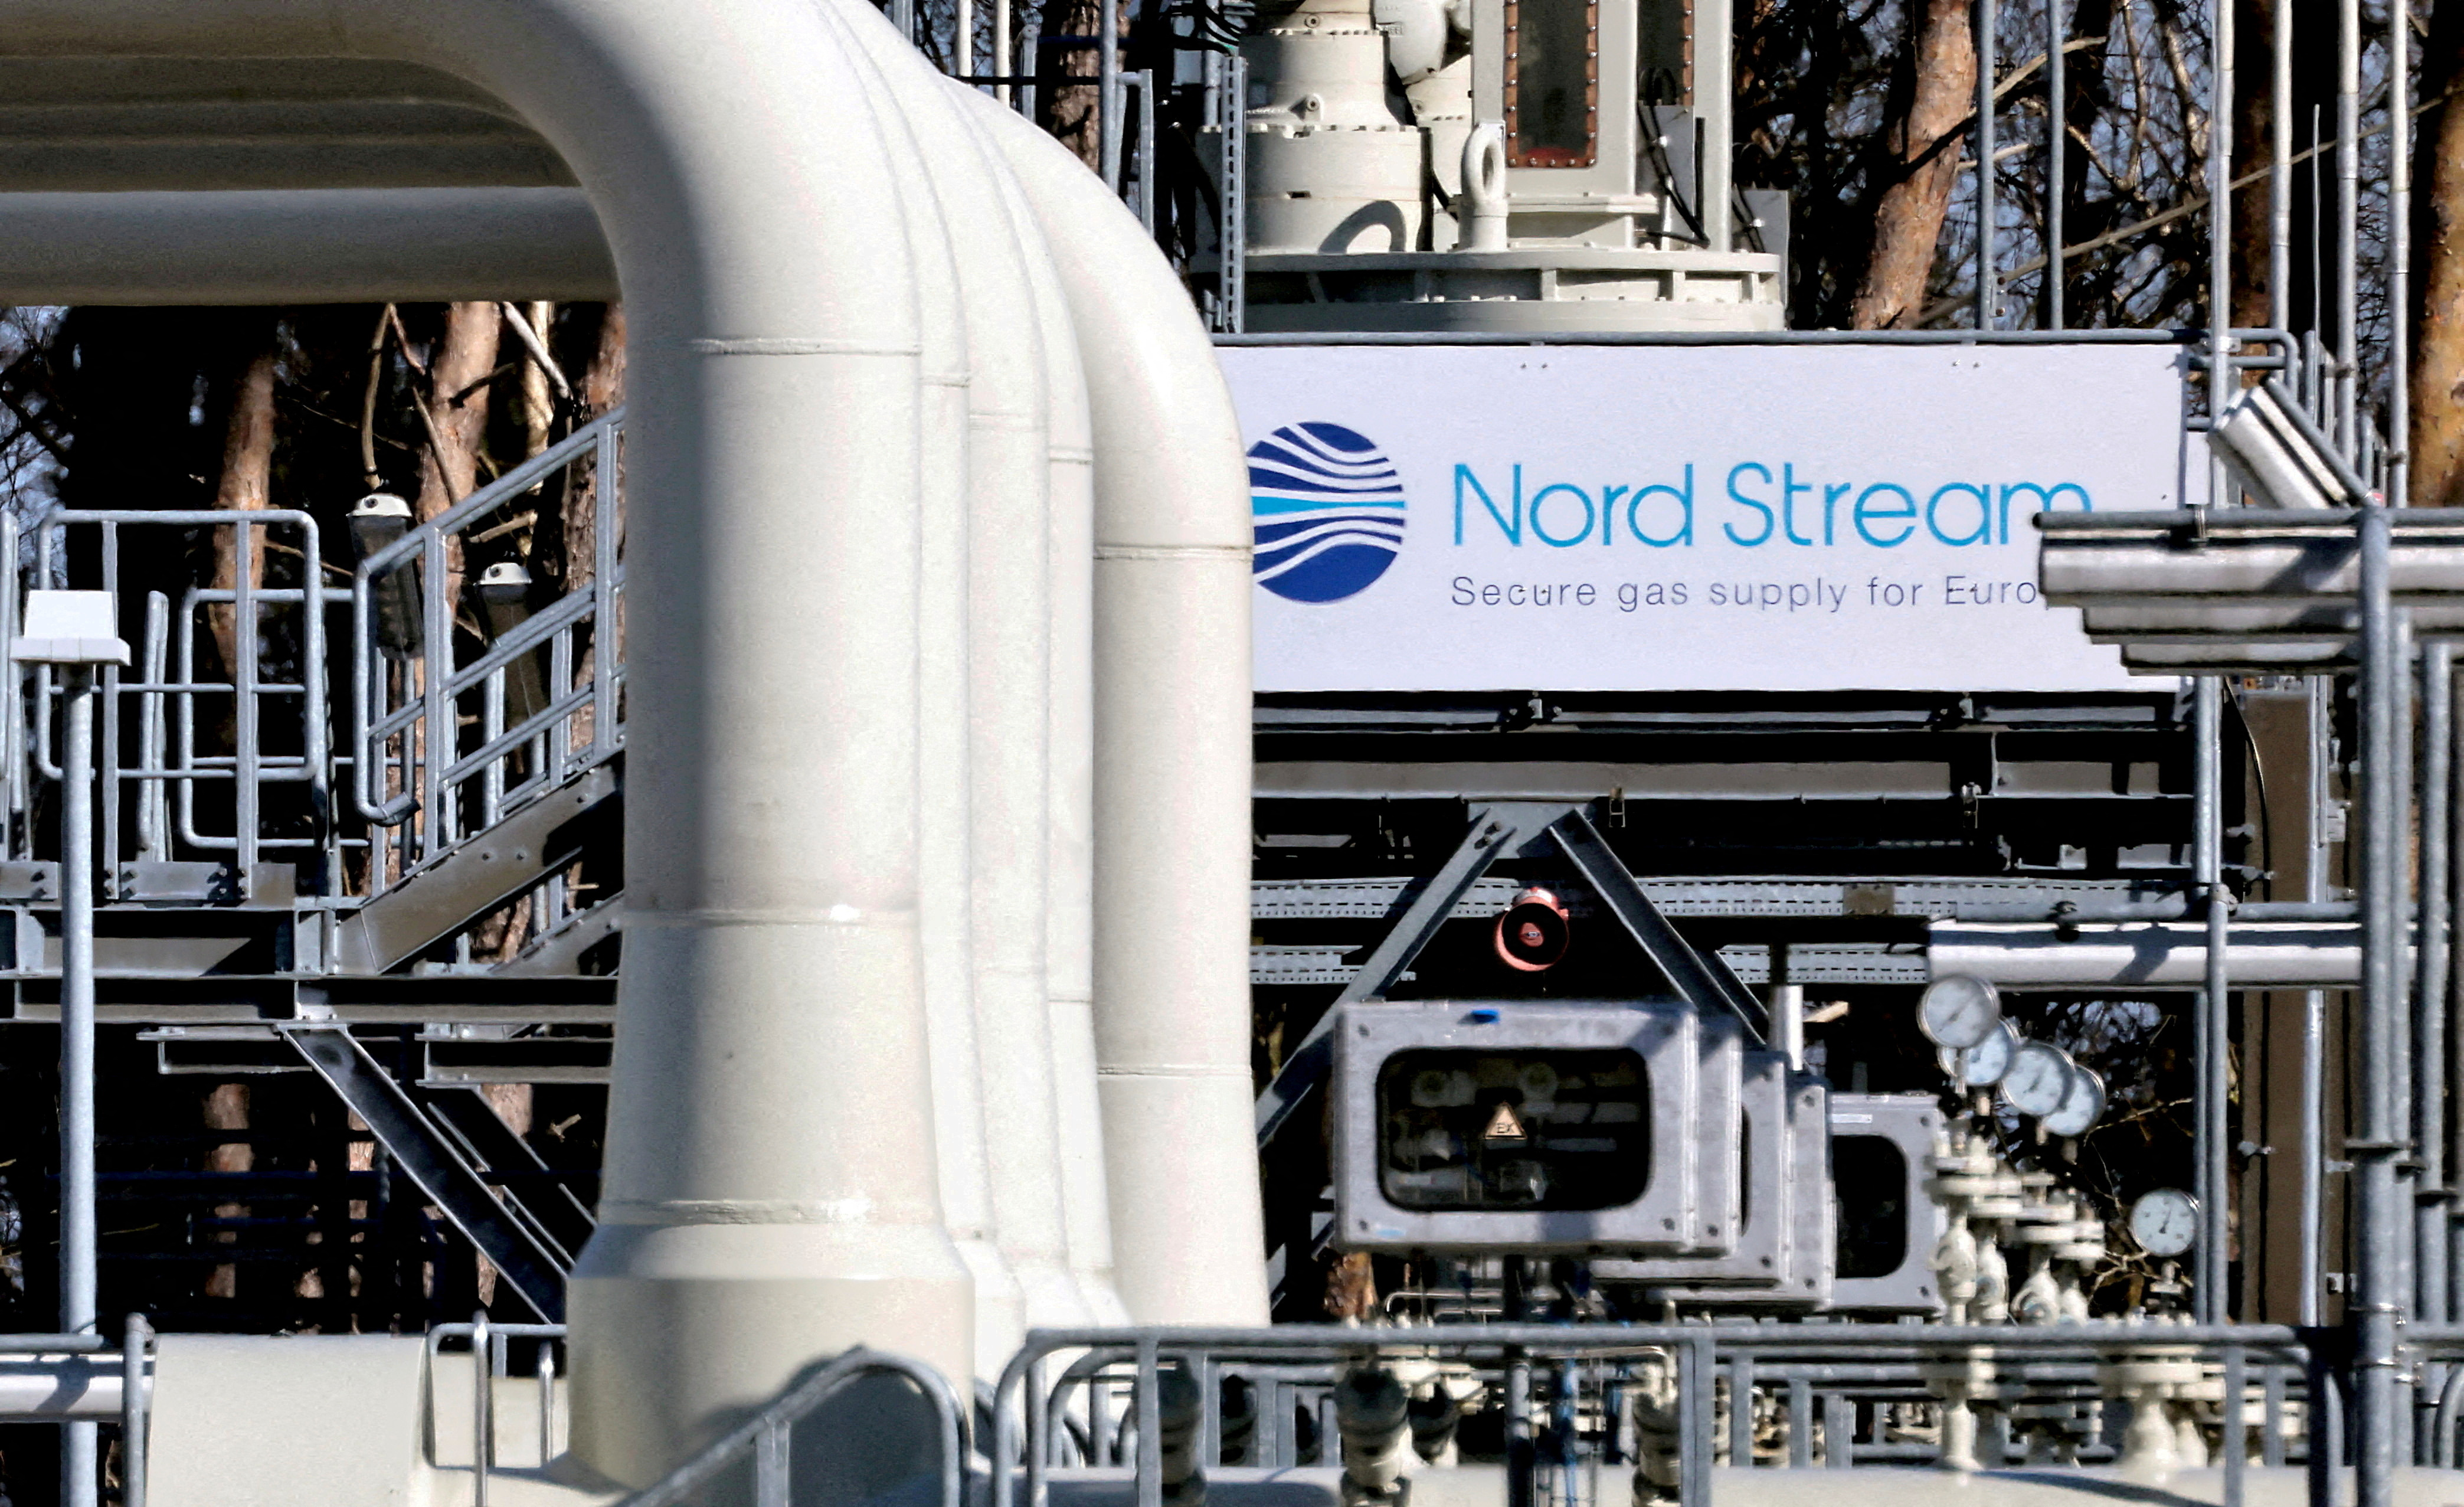 Pipes at the landfall facilities of the Nord Stream 1 gas pipeline in Lubmin, Germany